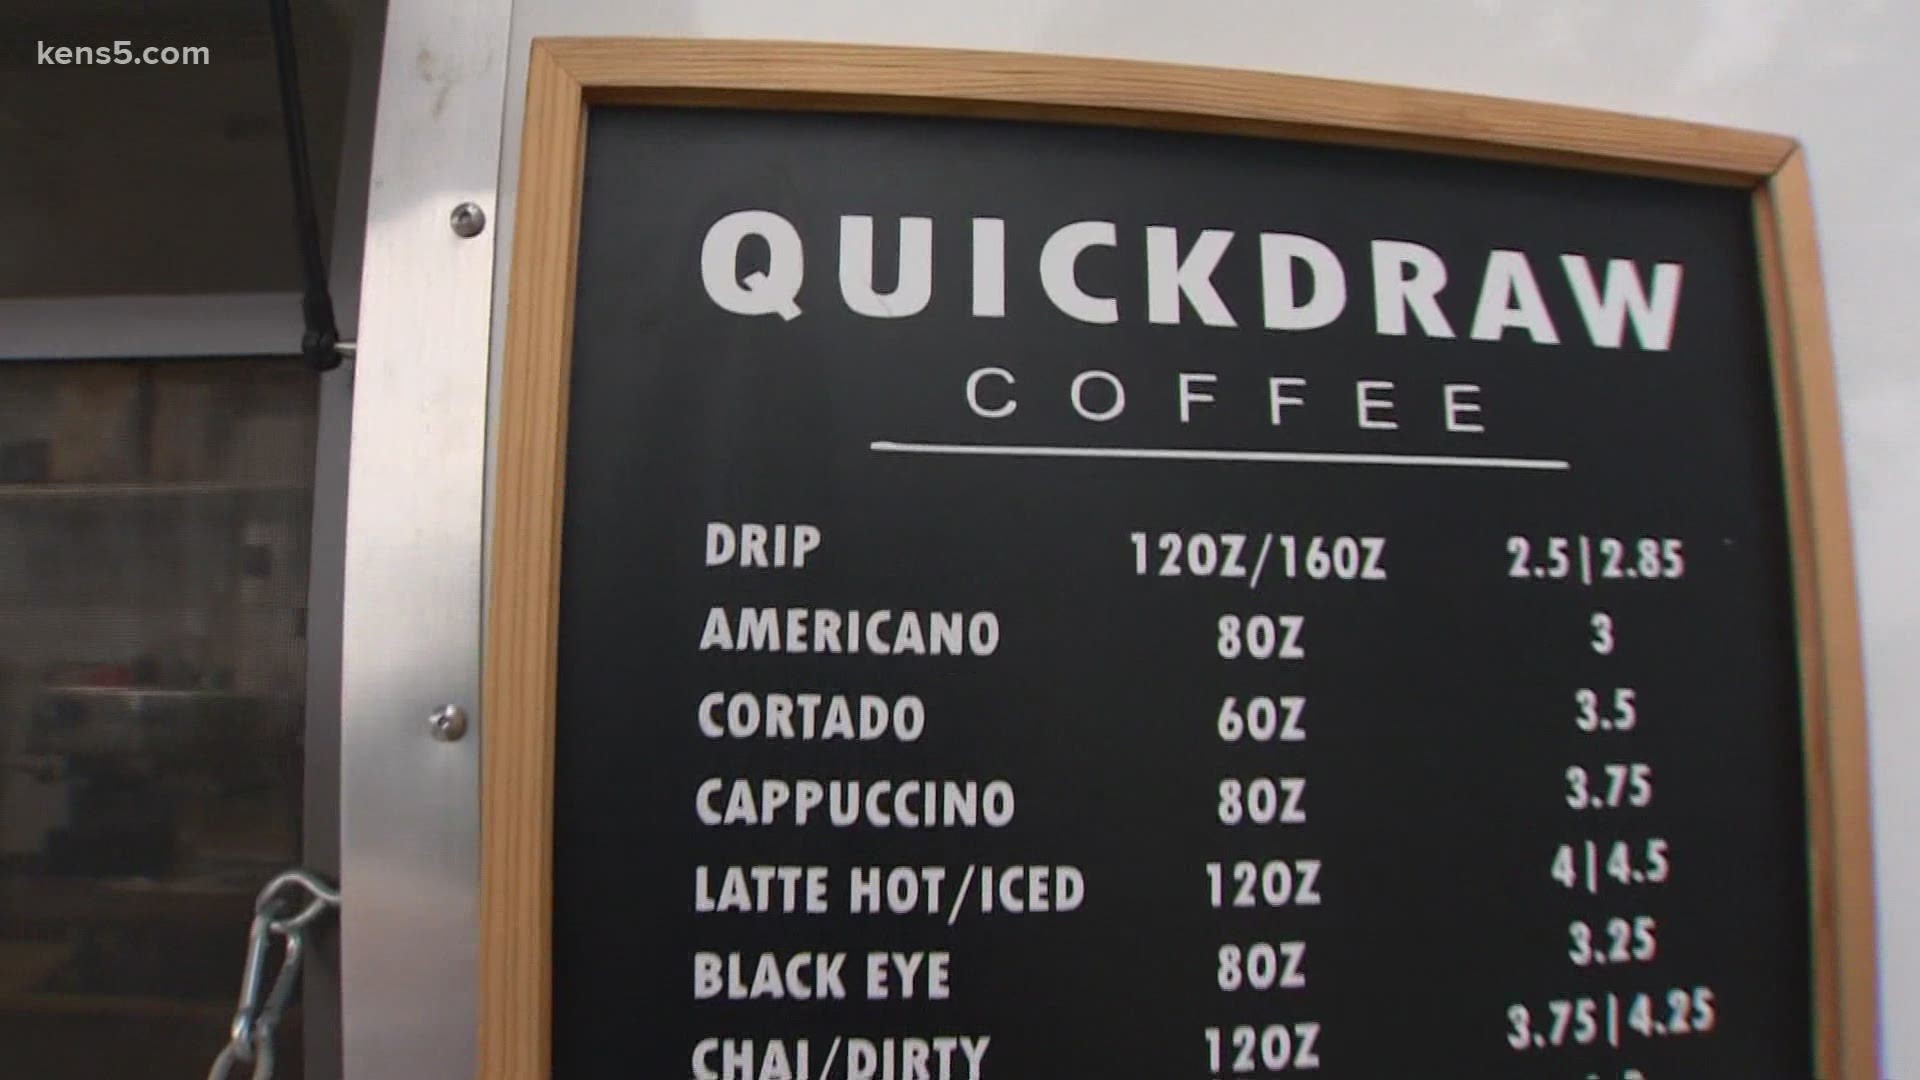 James DuBois--- veteran, firefighter, family man and coffee connoisseur. In this week's Keep SA Local segment, we're on the far northside at Quickdraw Coffee.